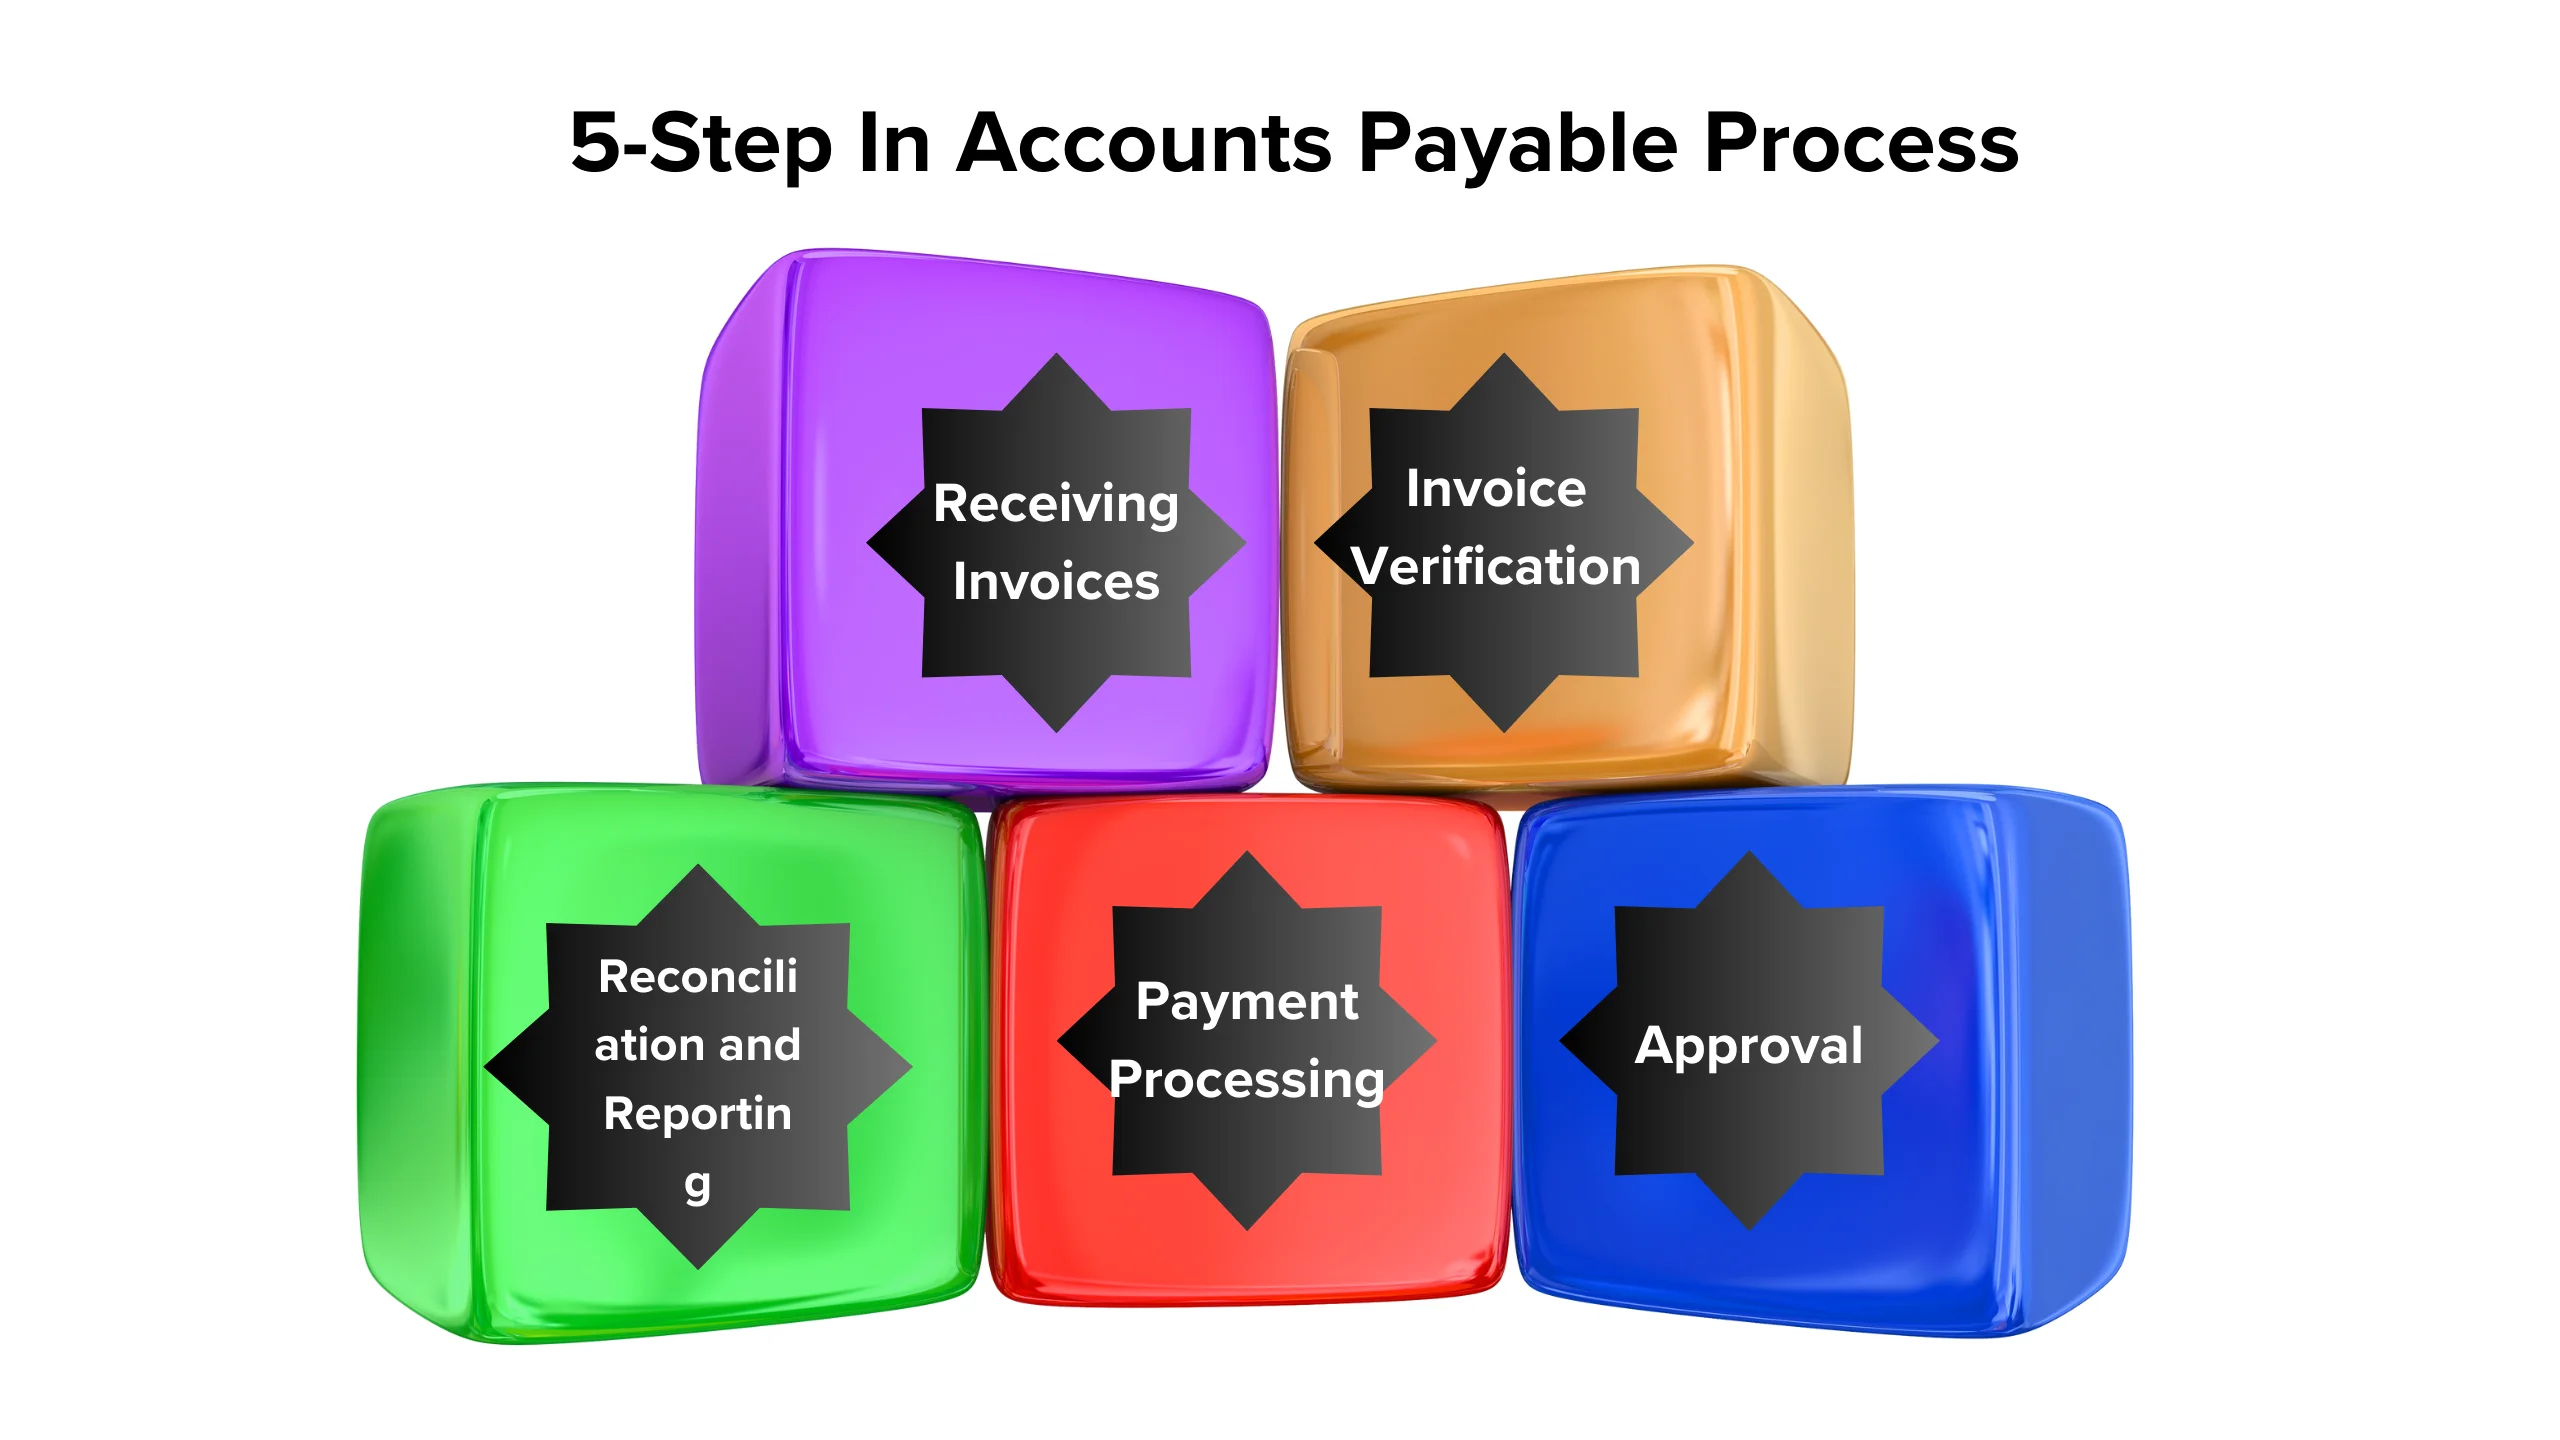 The accounts payable process involves managing and recording all the company's expenses and financial obligations to suppliers and vendors